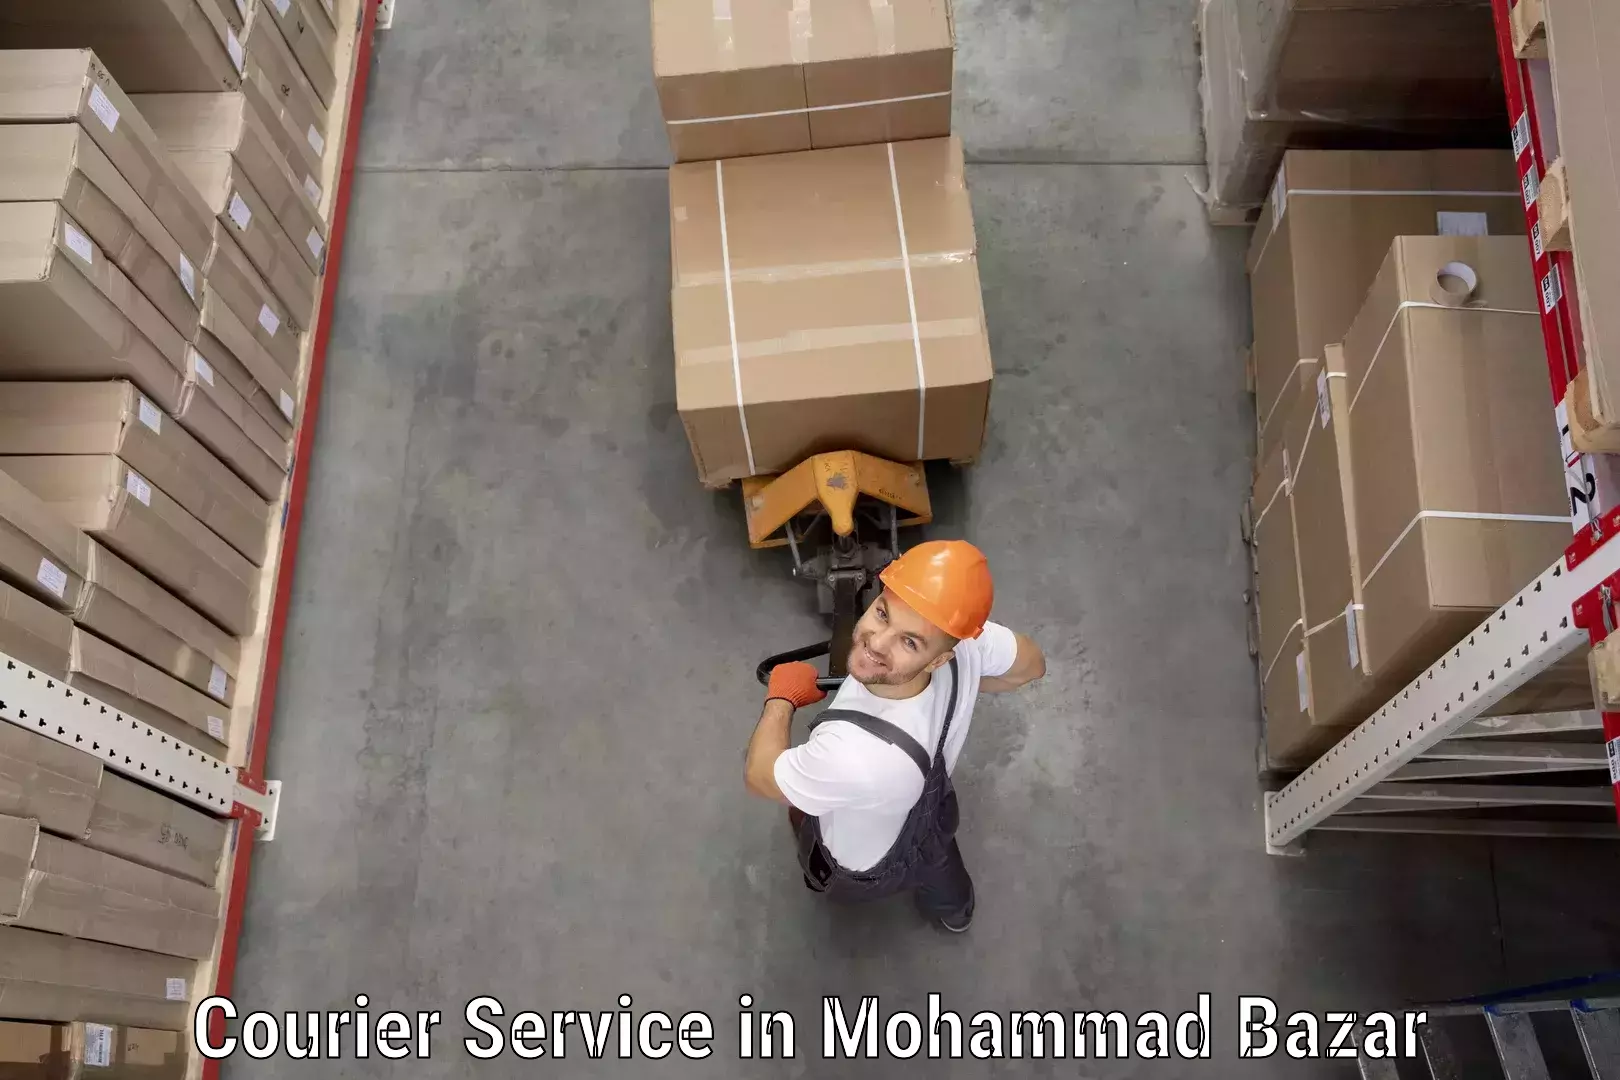 Advanced delivery solutions in Mohammad Bazar